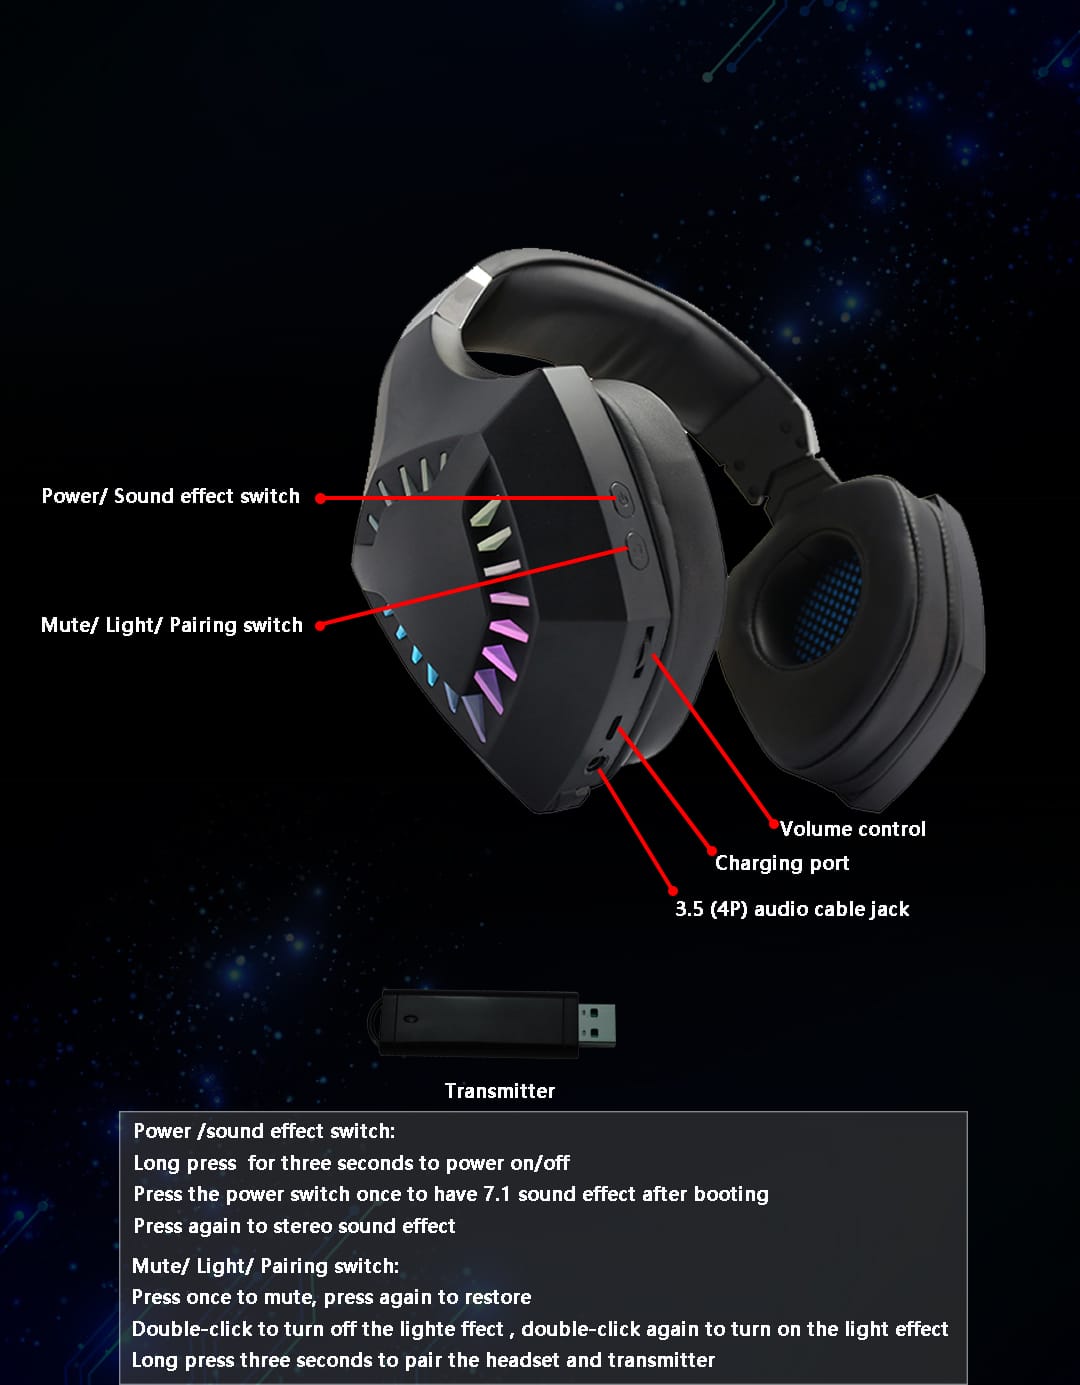 e-PitchPerfect e-PP 2.4G Wireless Gaming Headset 50mm Drivers with Microphone,Compatible with All Bluetooth devices Designed and Engineered in the USA Sold 7,000+ worldwide